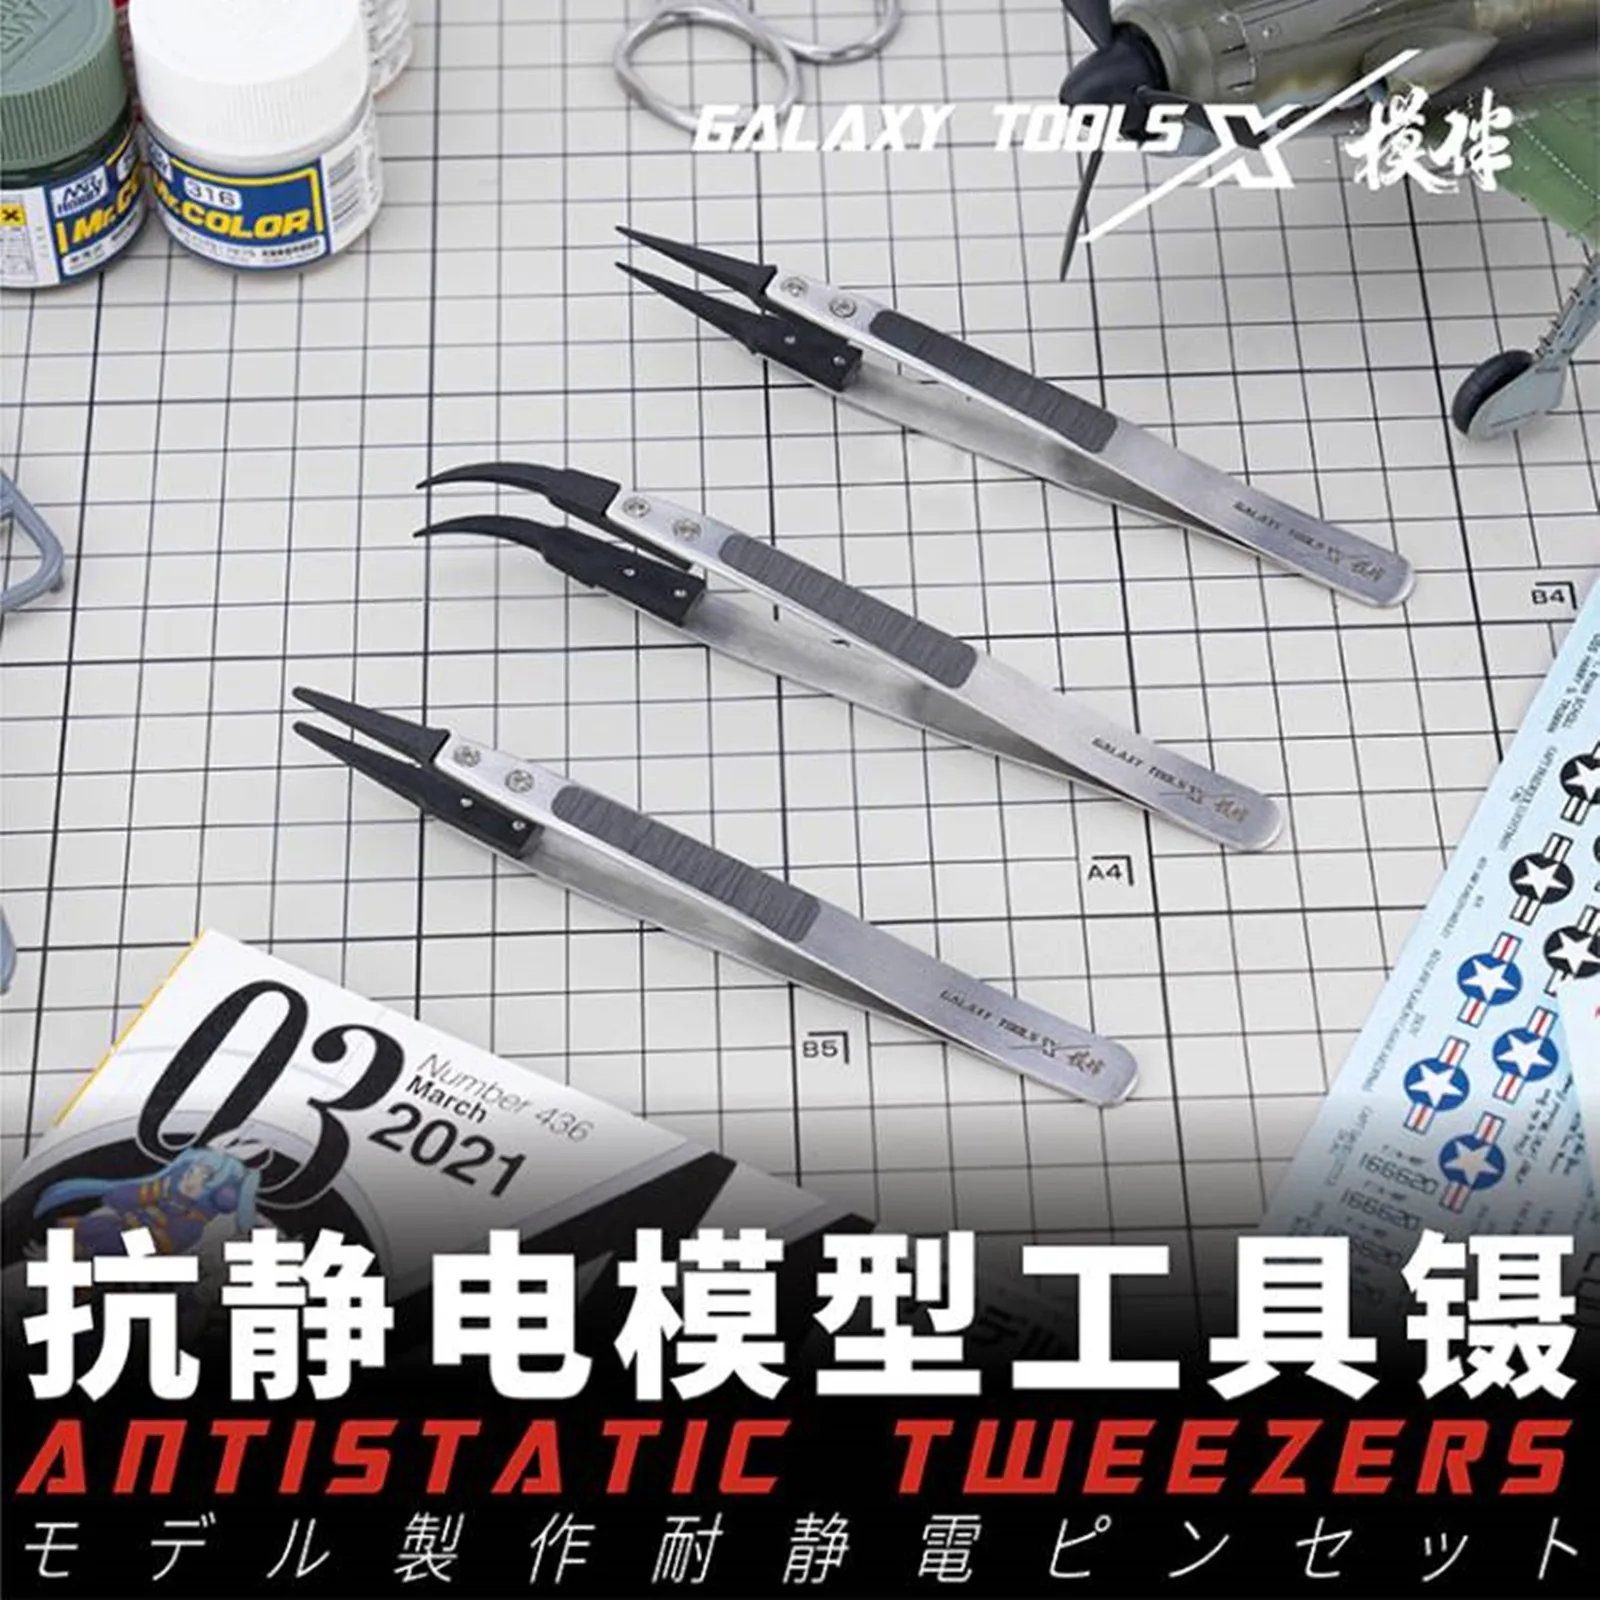 

Galaxy T10A08/T10A09/T10A10 Antistatic Tweezers with Replaceable Chucks Model Making Tools for Gundam Model Hobby Tools DIY